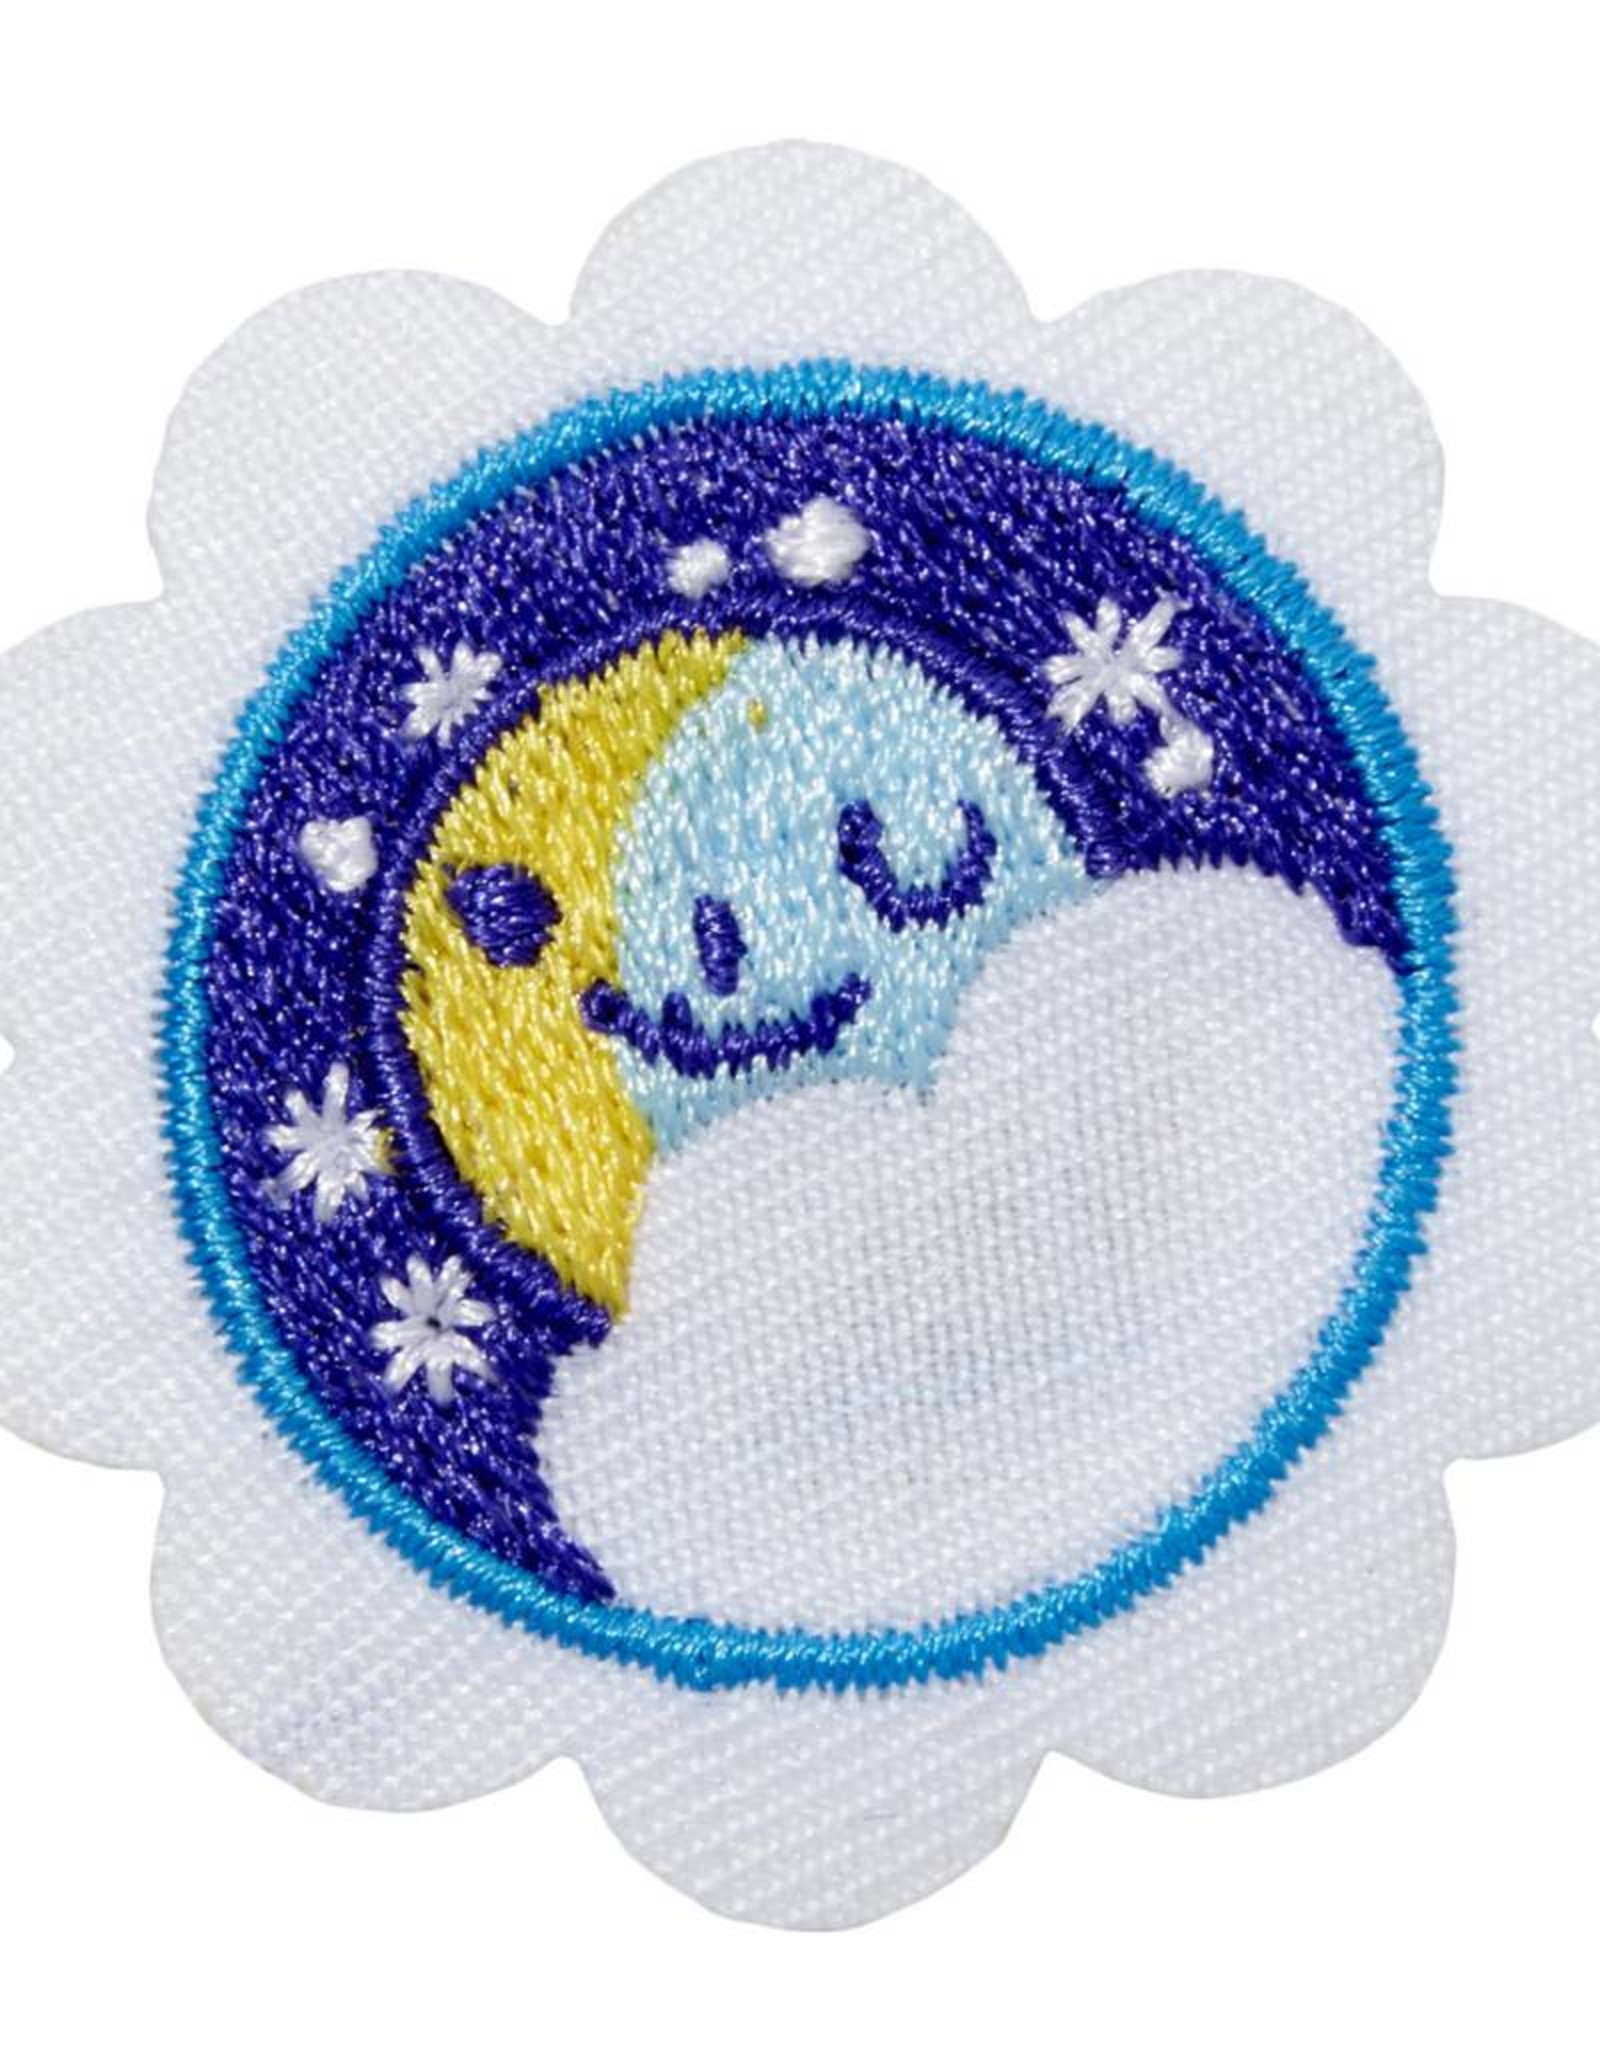 GIRL SCOUTS OF THE USA Daisy Space Science Explorer Badge